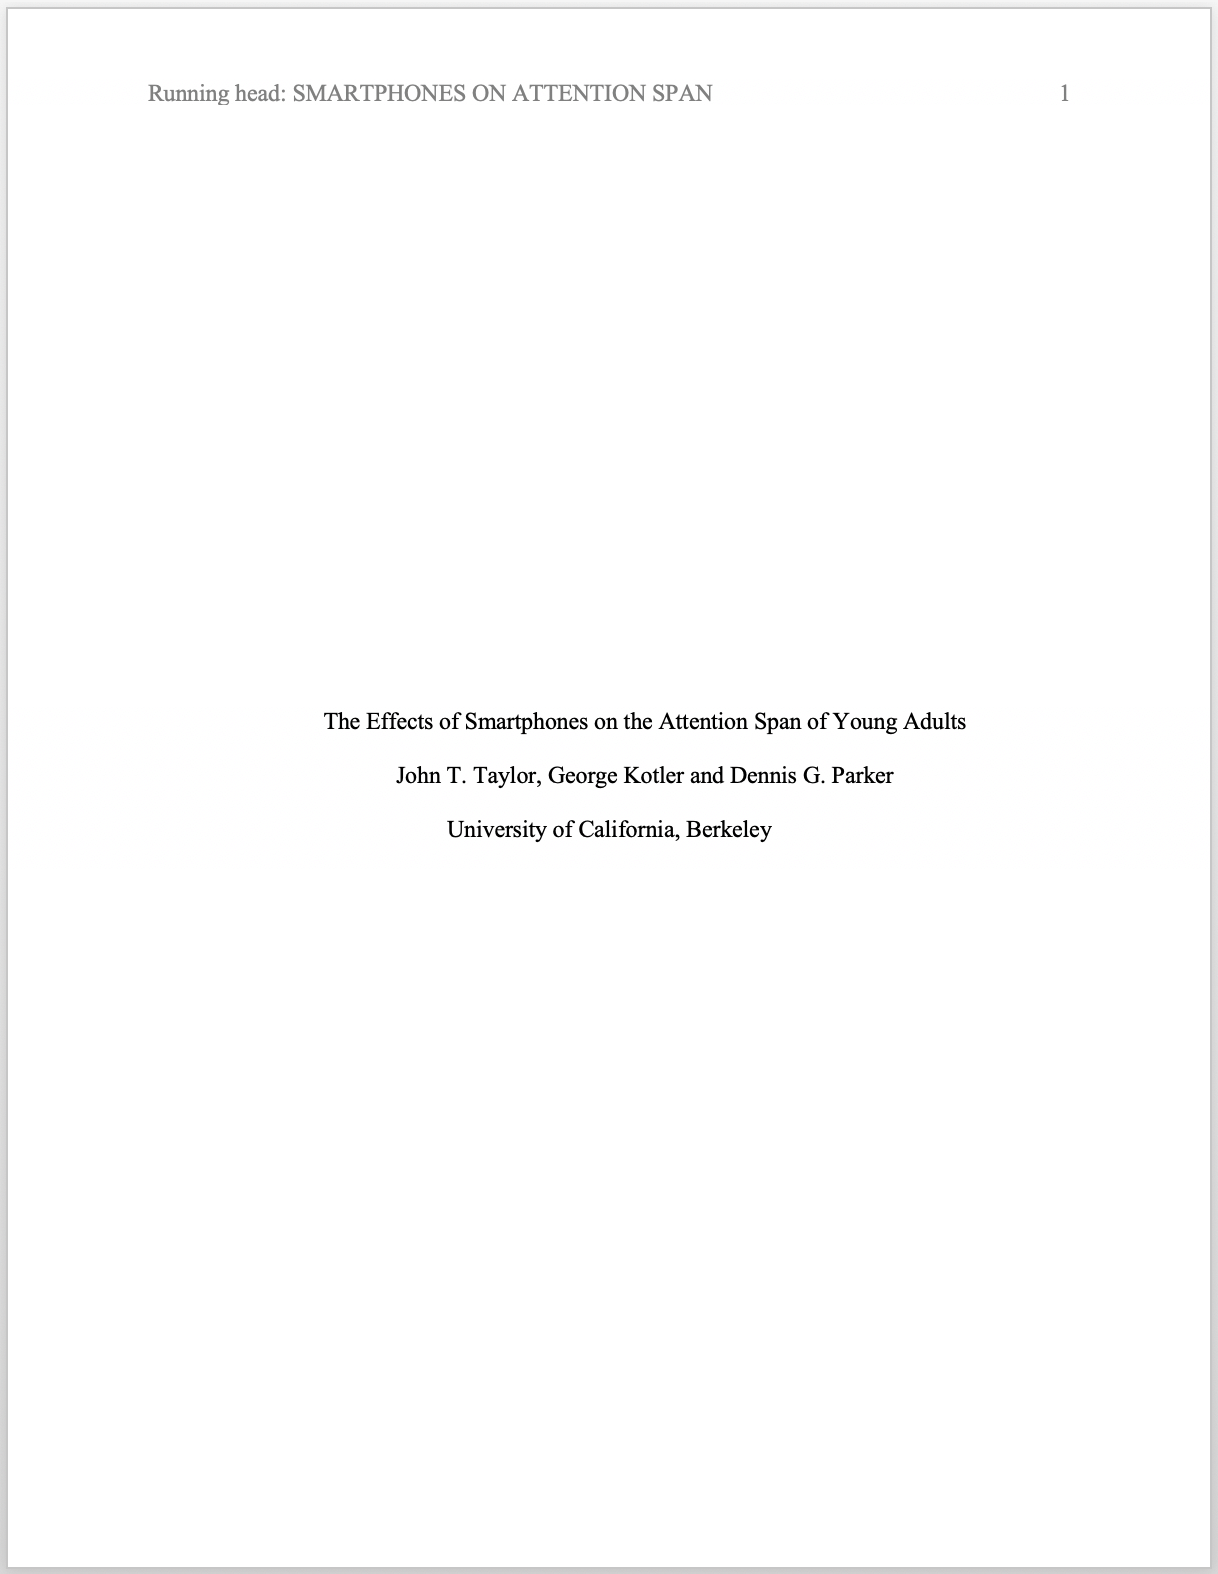 apa format title on second page